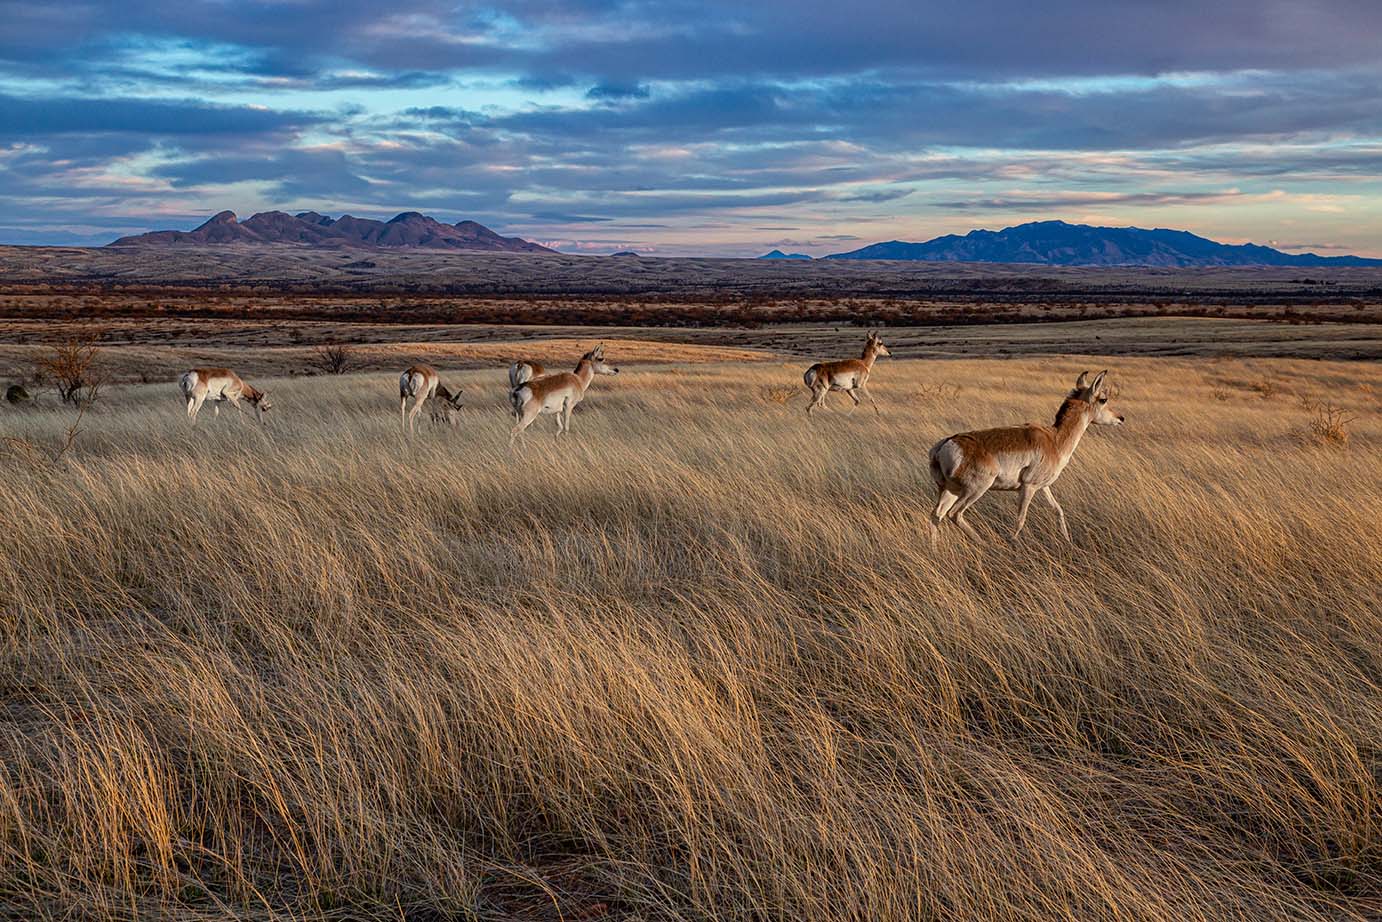 A group of pronghorn antelope standing in a grassland